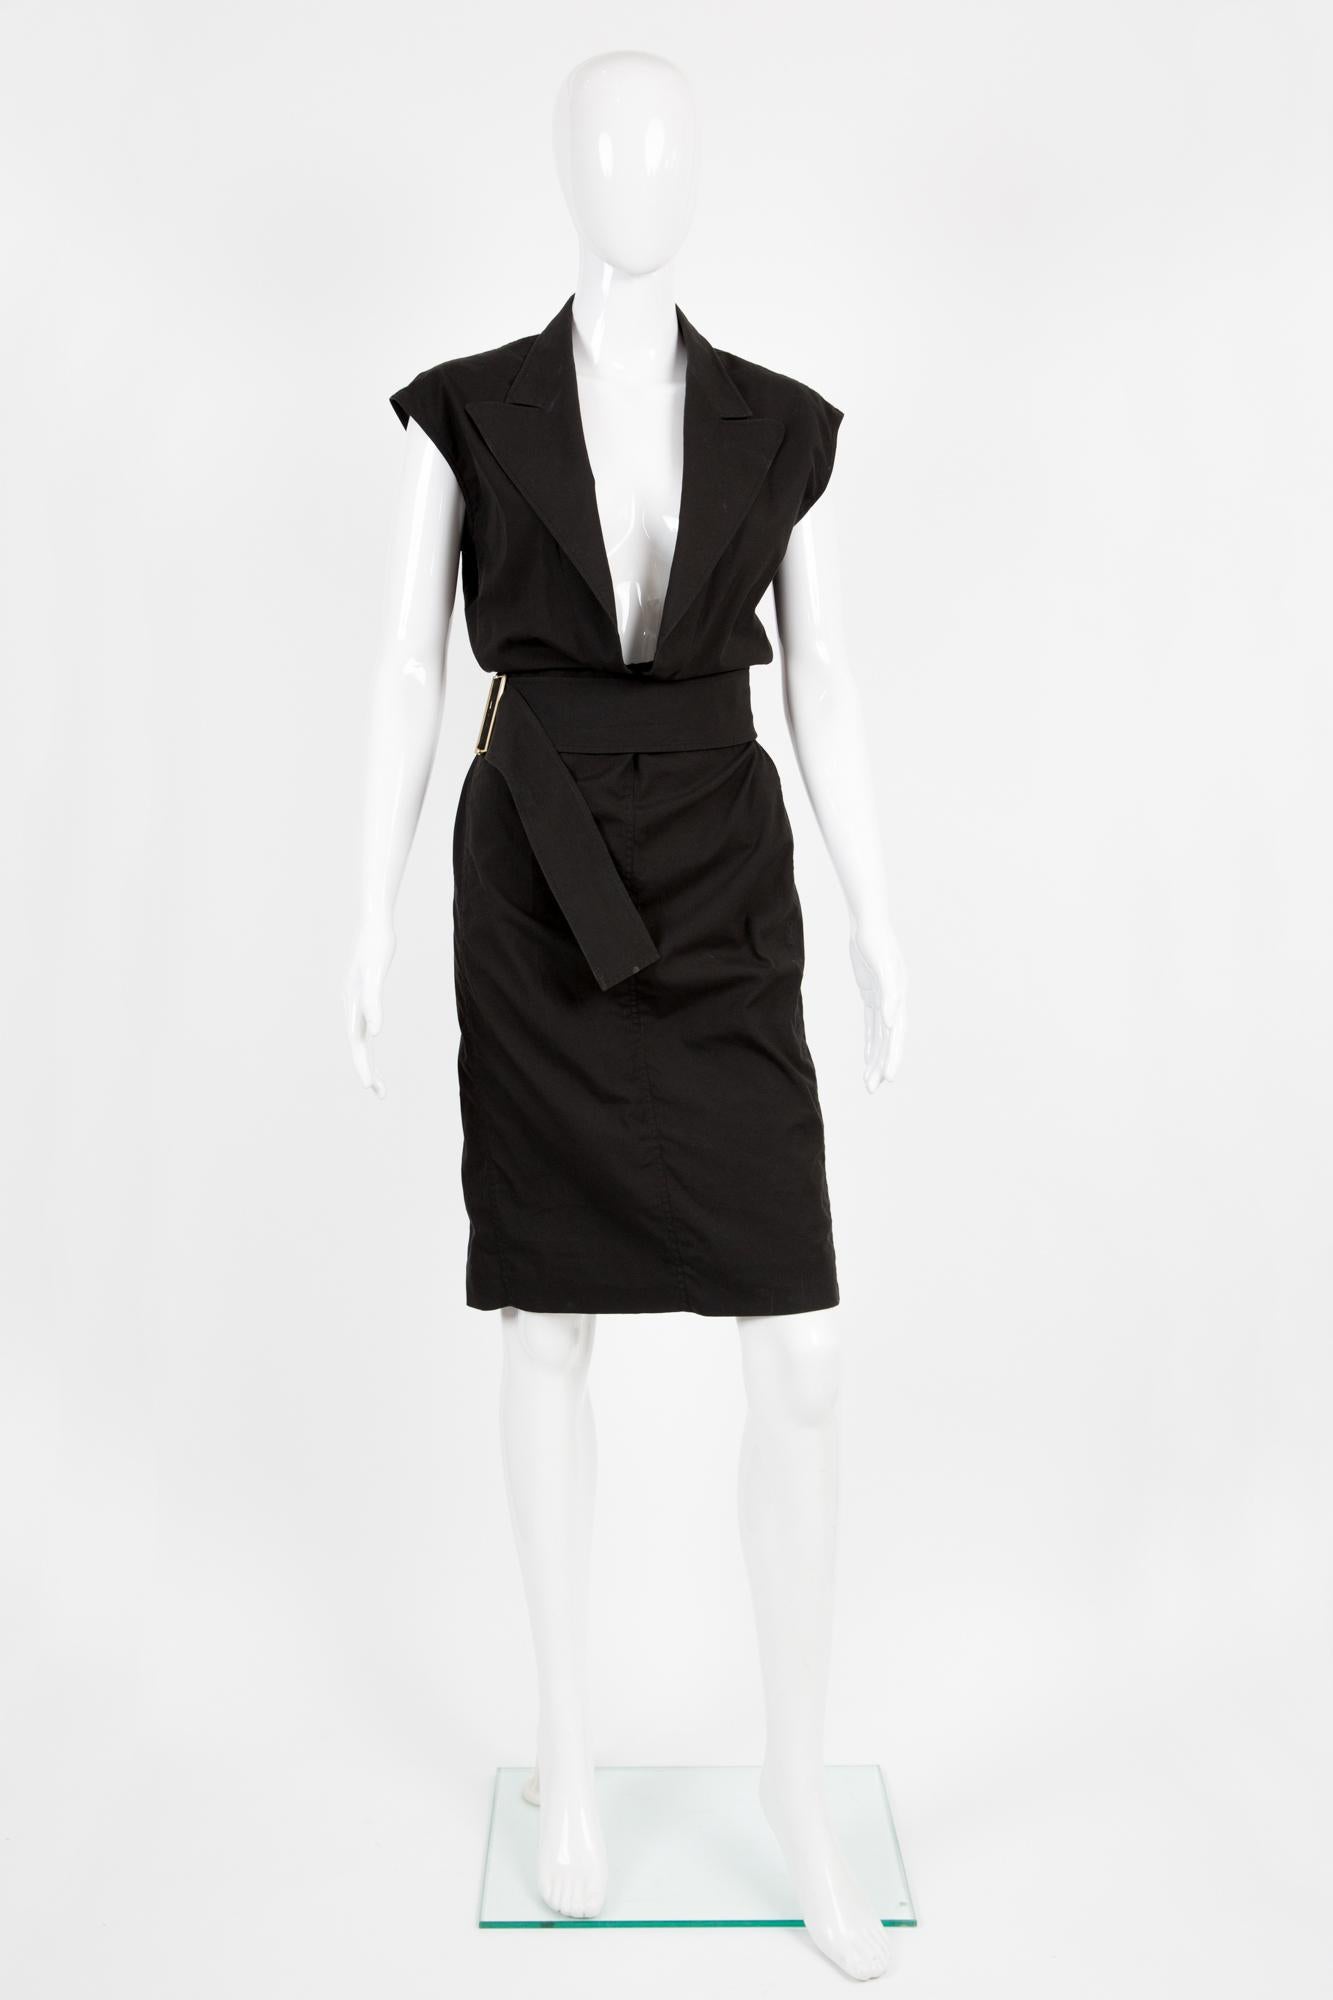 1990s Yves Saint Laurent black cotton sleeveless dress featuring a deep front V neck, a fake wrapped effect, a gold tone buckle. 
100% cotton
In excellent vintage condition. Made in France. 
Estimated size 36fr/ US4/ UK8
We guarantee you will